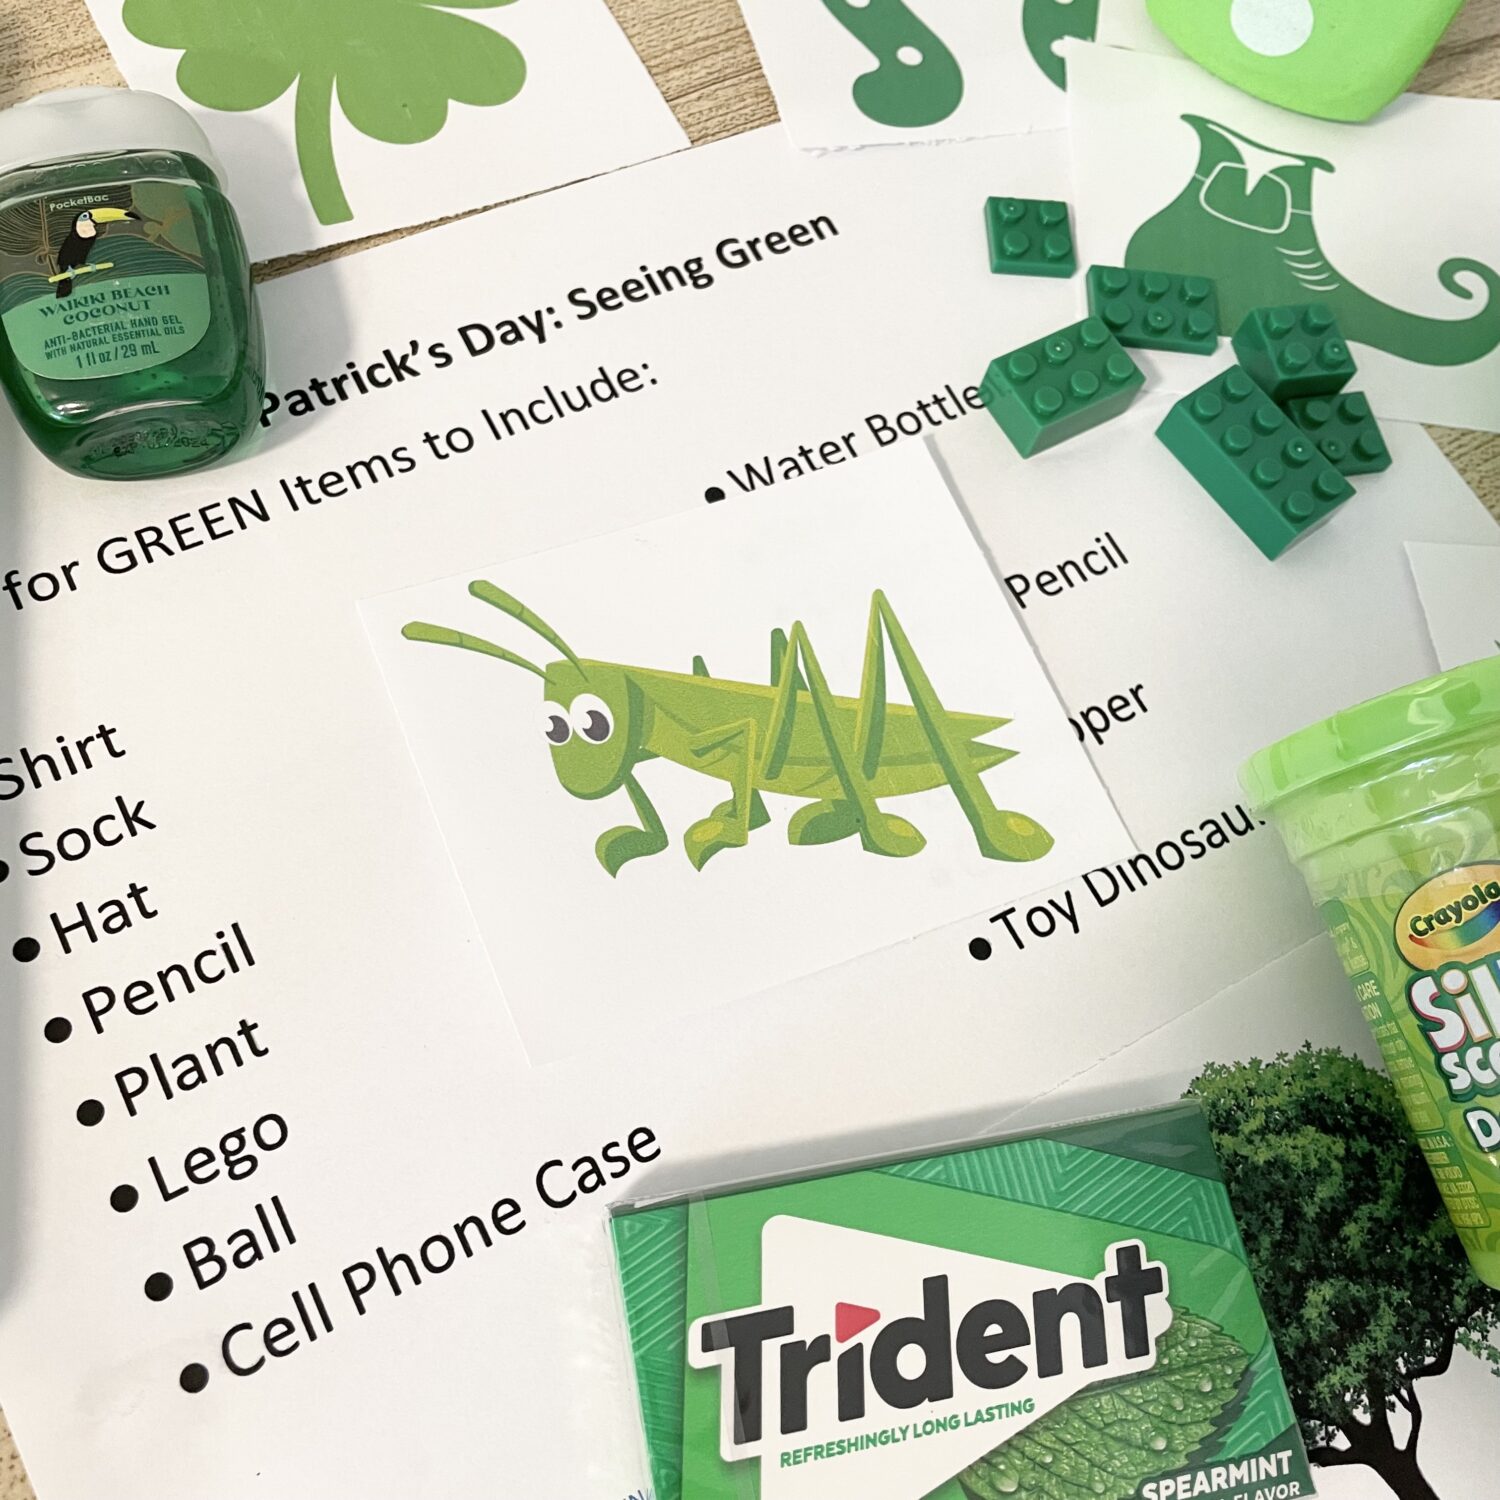 This fun St. Patrick's Day Seeing Green primary activity is a great way to review lots of different primary songs while uncovering green items for LDS Primary Singing Time Music Leaders.